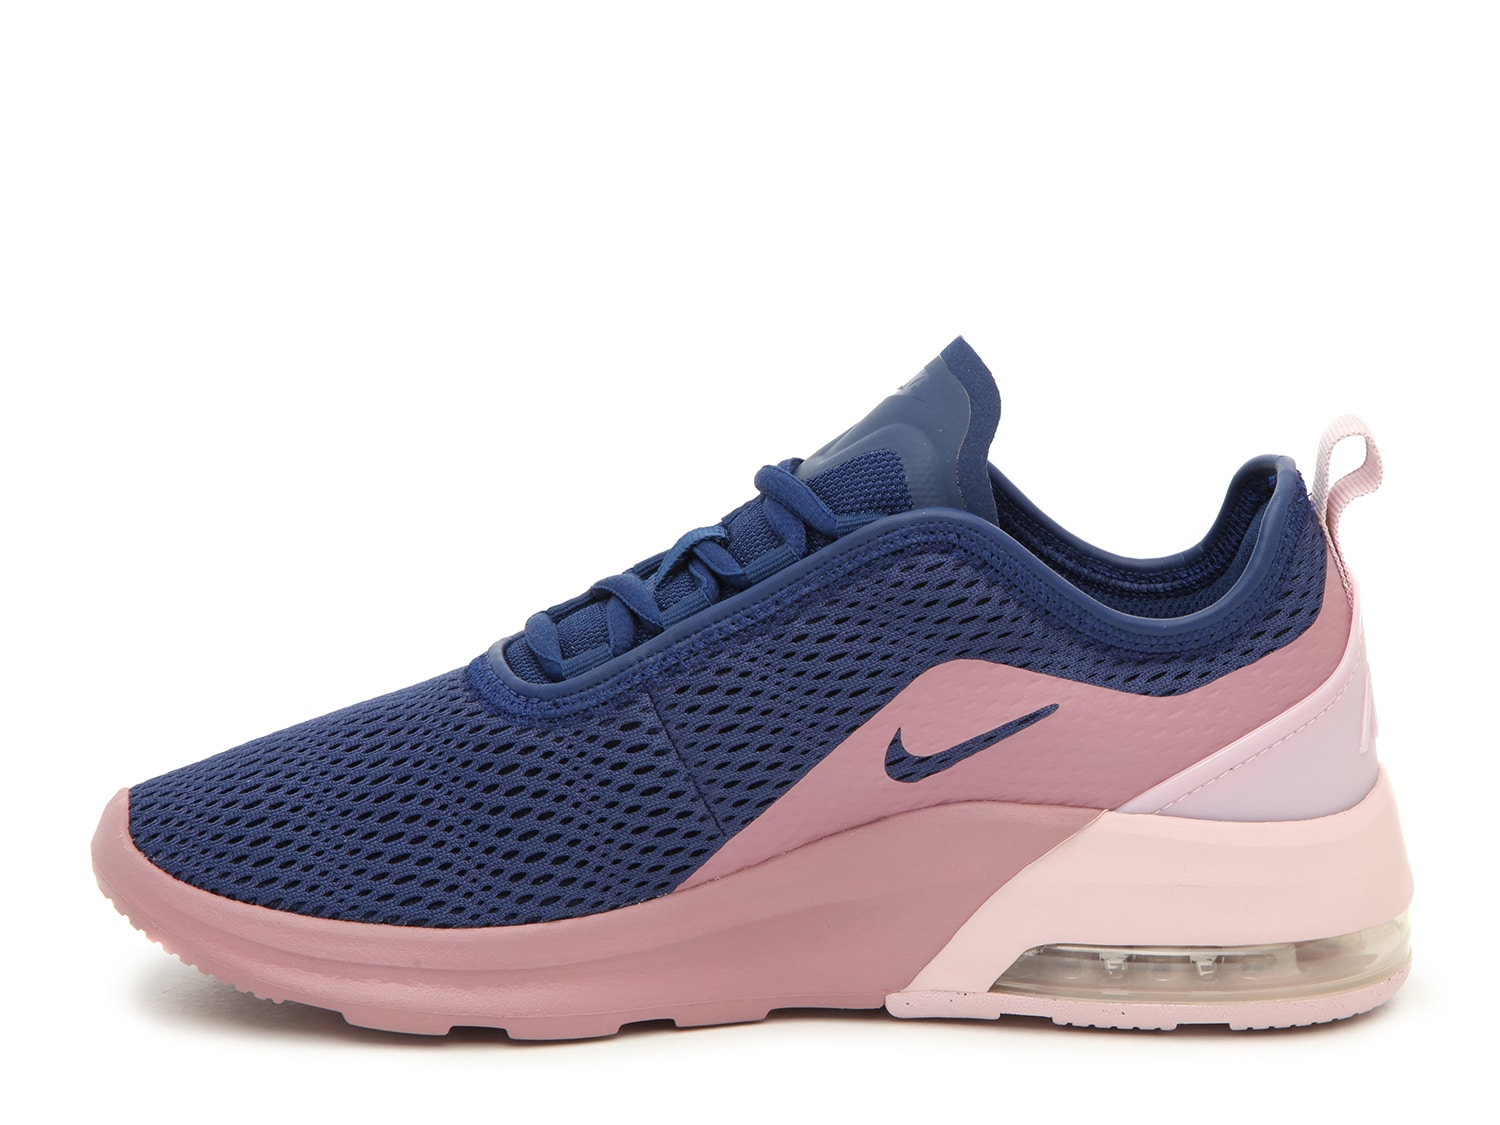 nike air max motion 2 women's pink and blue